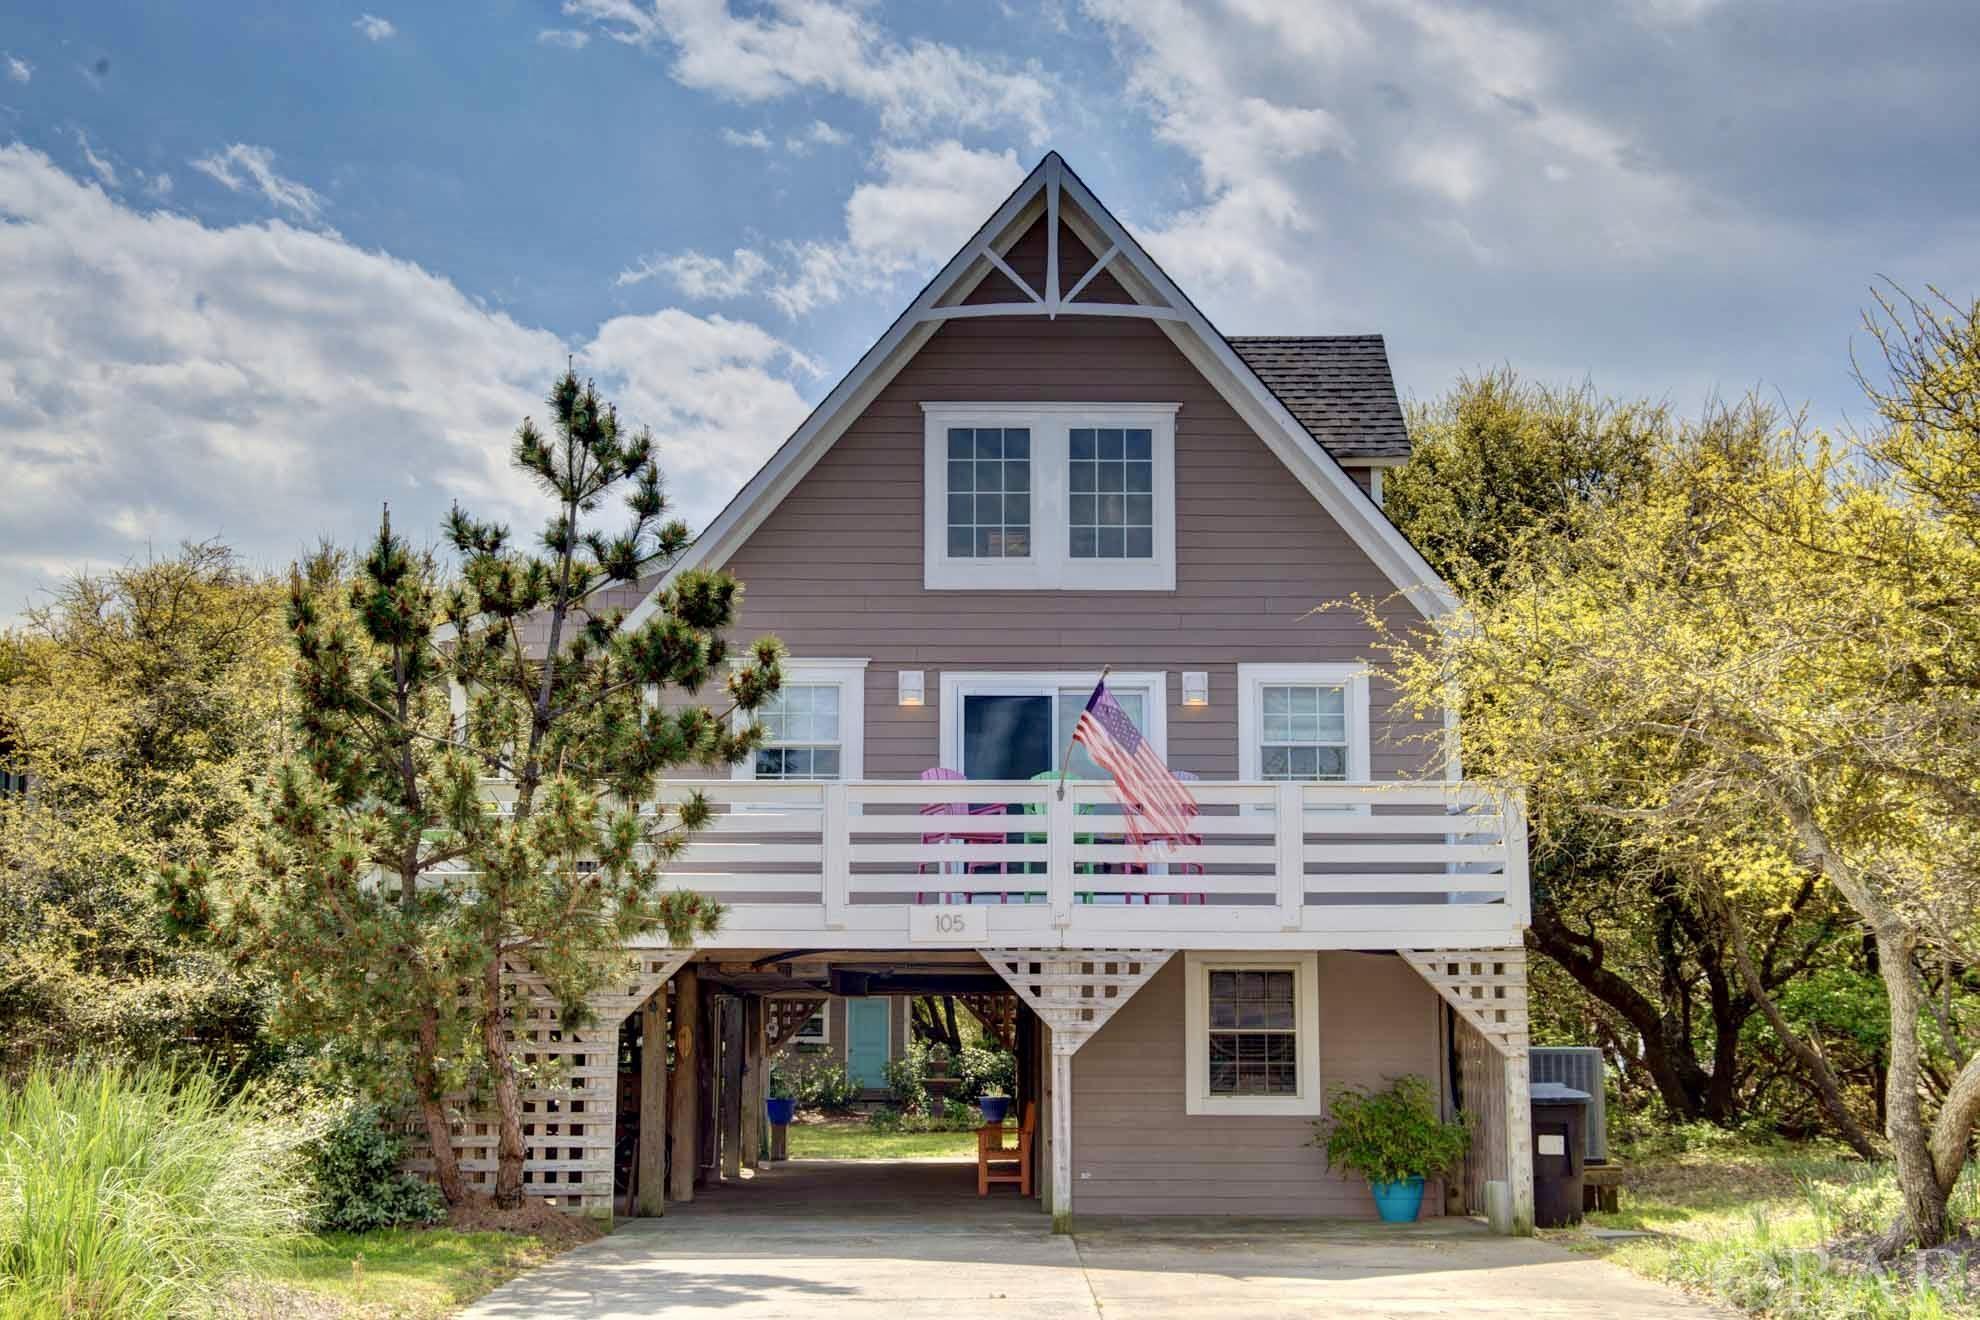 This charming renovated cottage is centrally located in the heart of Kill Devil Hills, just a short distance to the public beach access. Enjoy 3 bedrooms and 2 full baths upstairs, and a separate ground-level unit with 1 Bed, a full bathroom, and kitchenette. The private yard shaded by gorgeous live oak trees is perfect for relaxing and playing yard games. Outdoor boasts pea stone patio, private outdoor shower, main deck with dining table for 8, an extremely private upper deck, and 5 seat hot tub. The main home as an airy open living/kitchen combo with vaulted ceiling, shiplap walls, granite counters, and beaming hardwood floors. Also on this floor are two bedrooms with sliding glass doors leading to the private back deck. The main bath on this floor is nicely updated with tile floors and subway tile shower.  The hardwood stairs lead to the 3rd floor and primary bedroom. The space has vaulted ceilings, shiplap walls, and a beautiful custom walk in shower that you will love! Private 3rd floor deck ideal for sun bathing. Updates include: New hot tub (2021), new roof (2020), downstairs remodel with split unit (2019), outdoor shower (2019), hardie plank siding (2015), vinyl windows (2015), slider (2015), drainfield (2016), and hot water heater (2021).